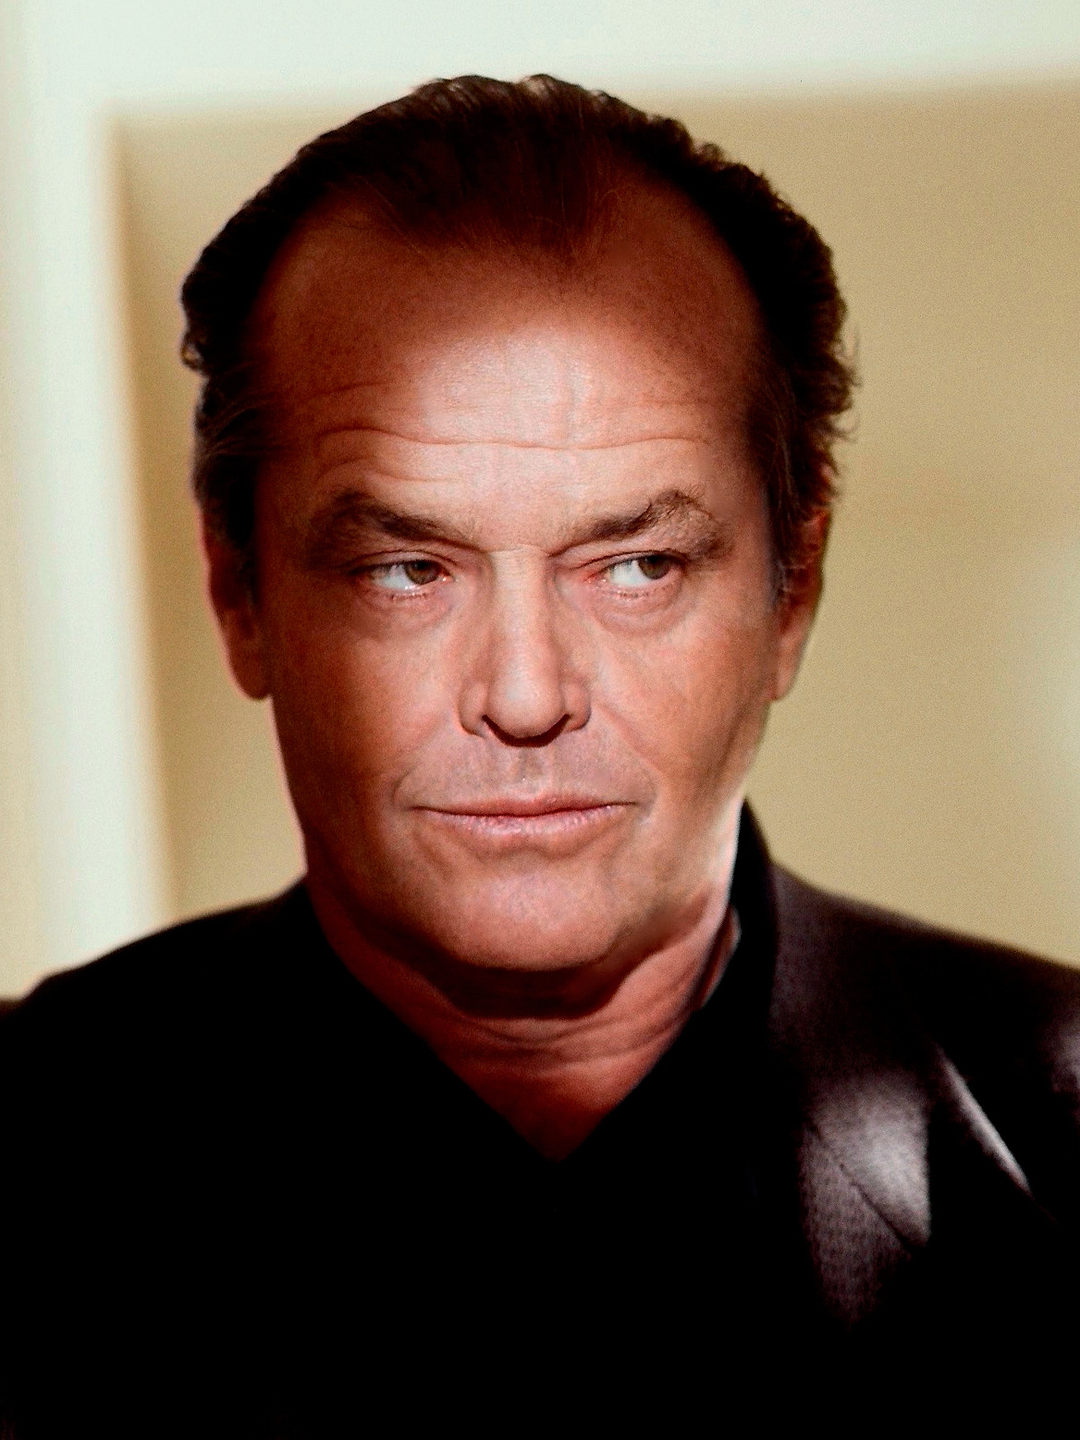 Jack Nicholson who are his parents